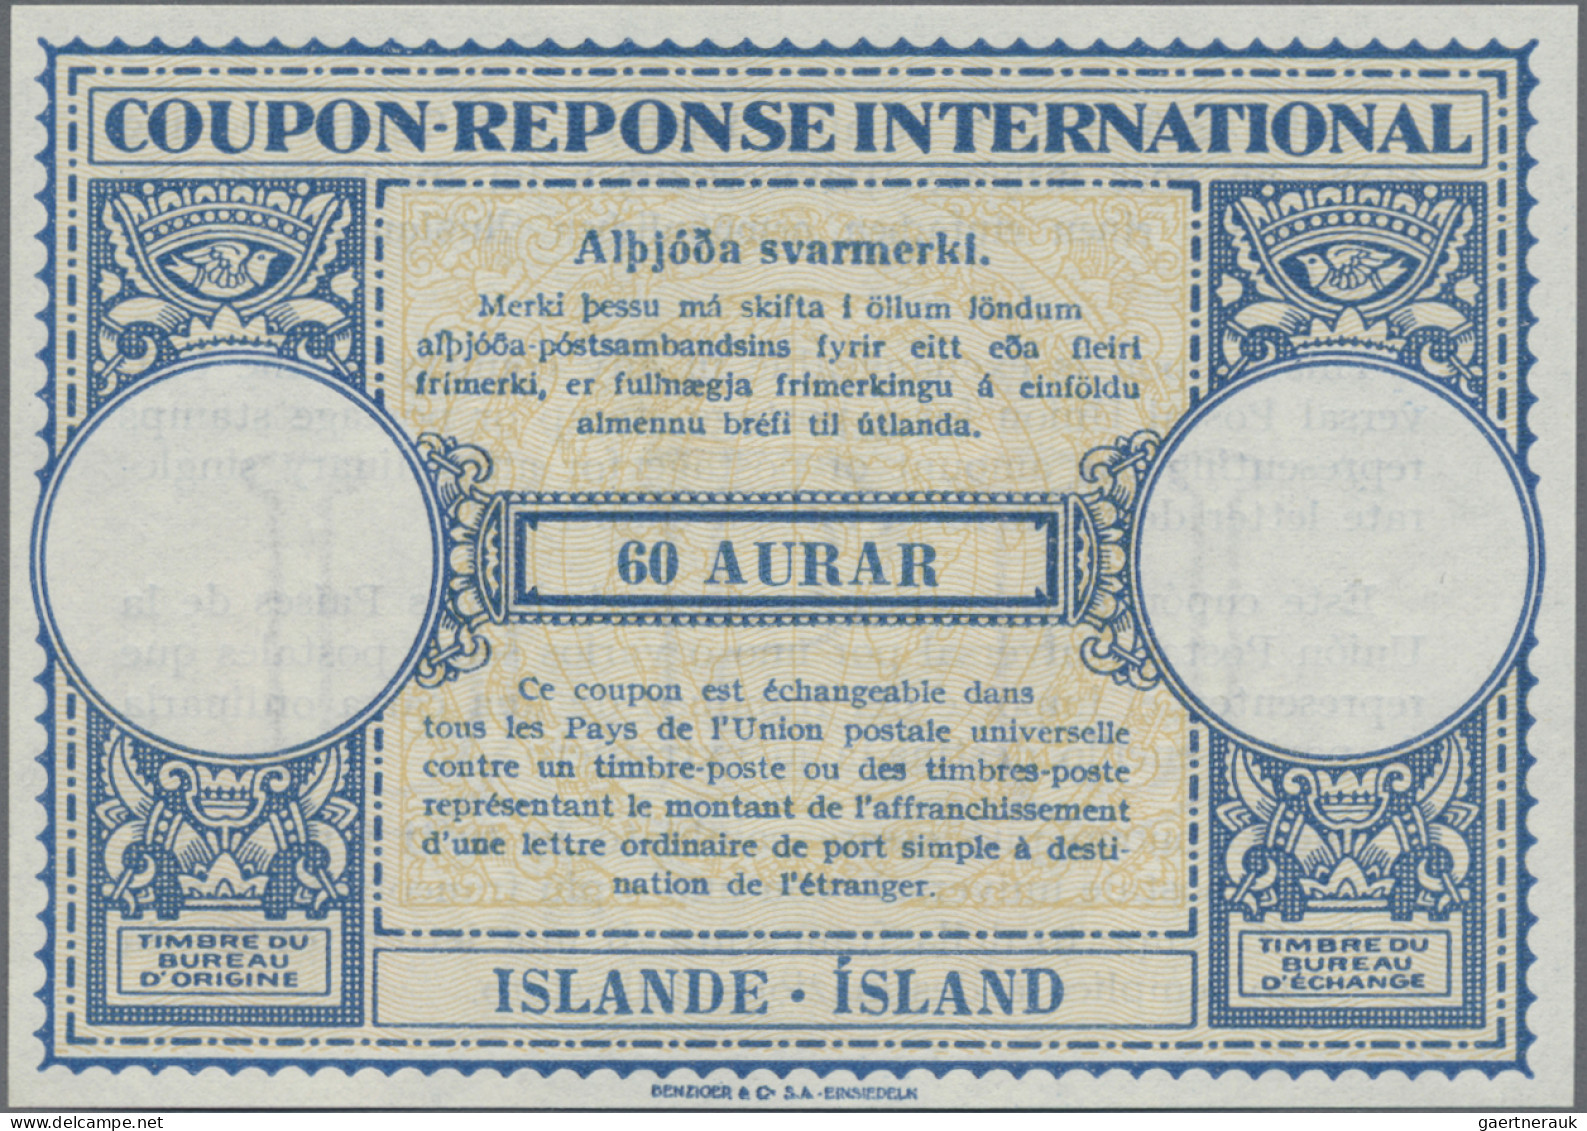 Iceland - Postal Stationery: 1947-2023 Collection Of 33 Intern. Reply Coupons, M - Entiers Postaux